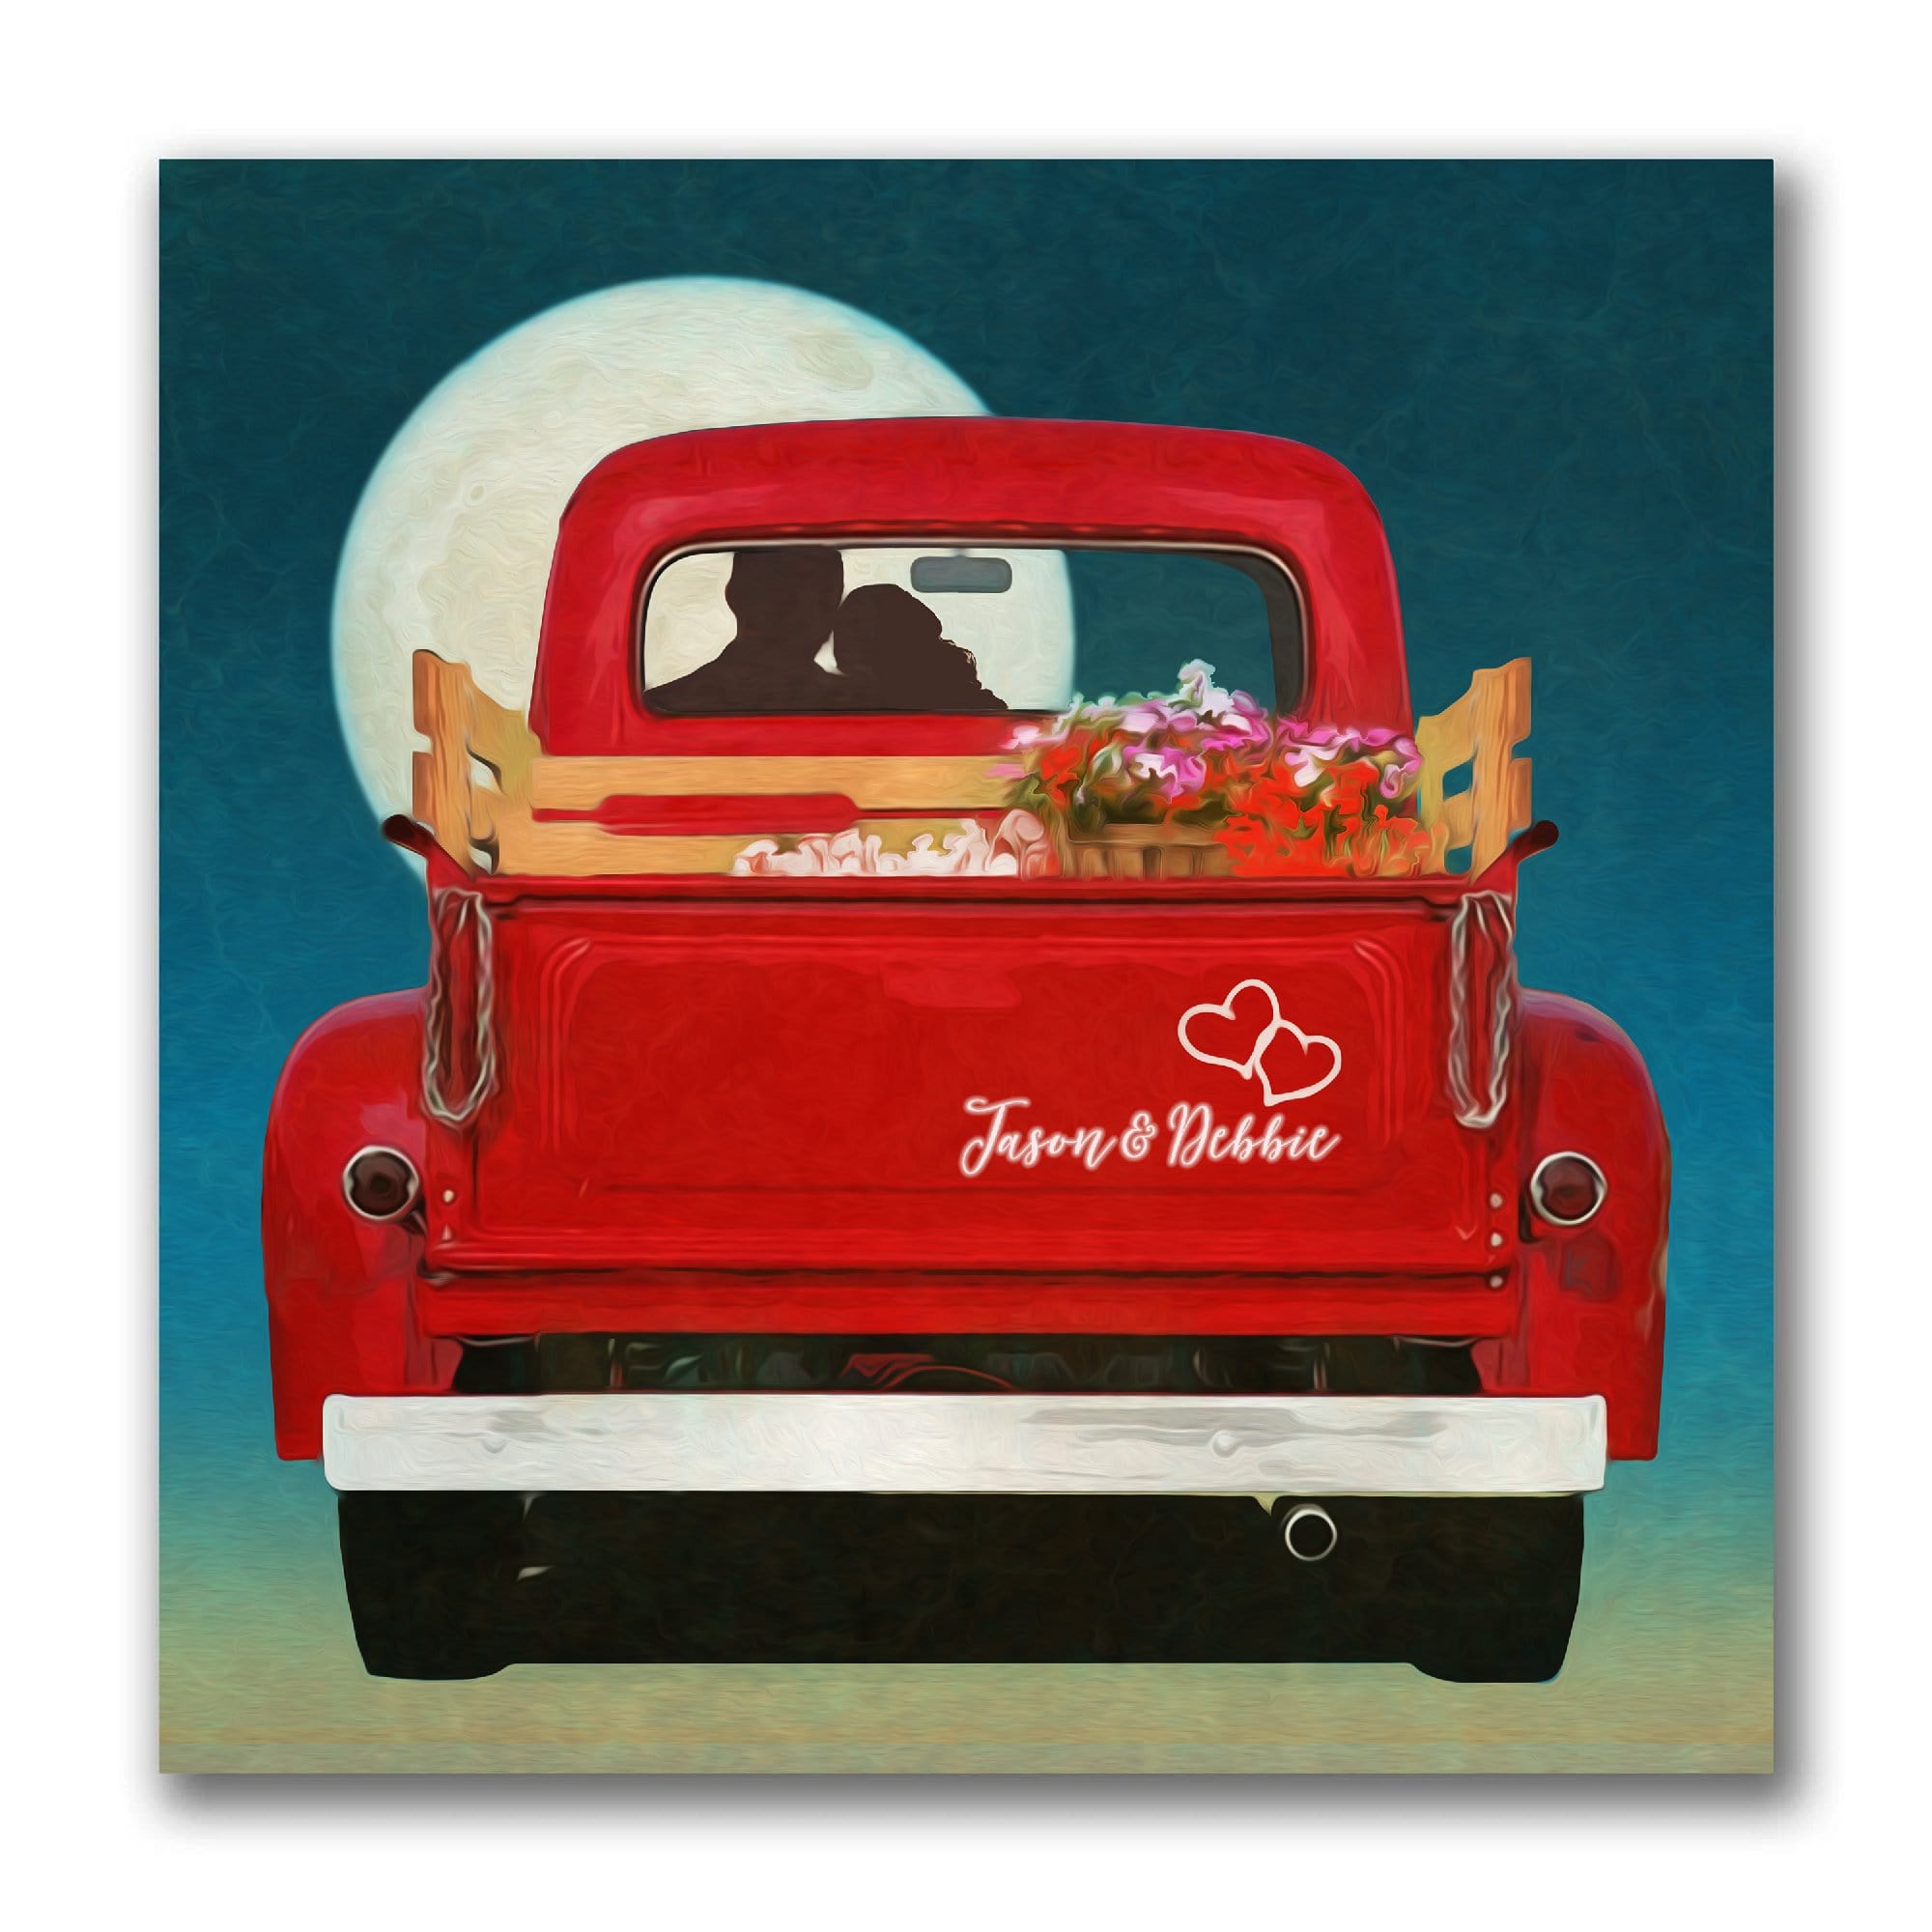 Romantic personalized art of red truck, a full moon, silhouettes of a couple and your personalization